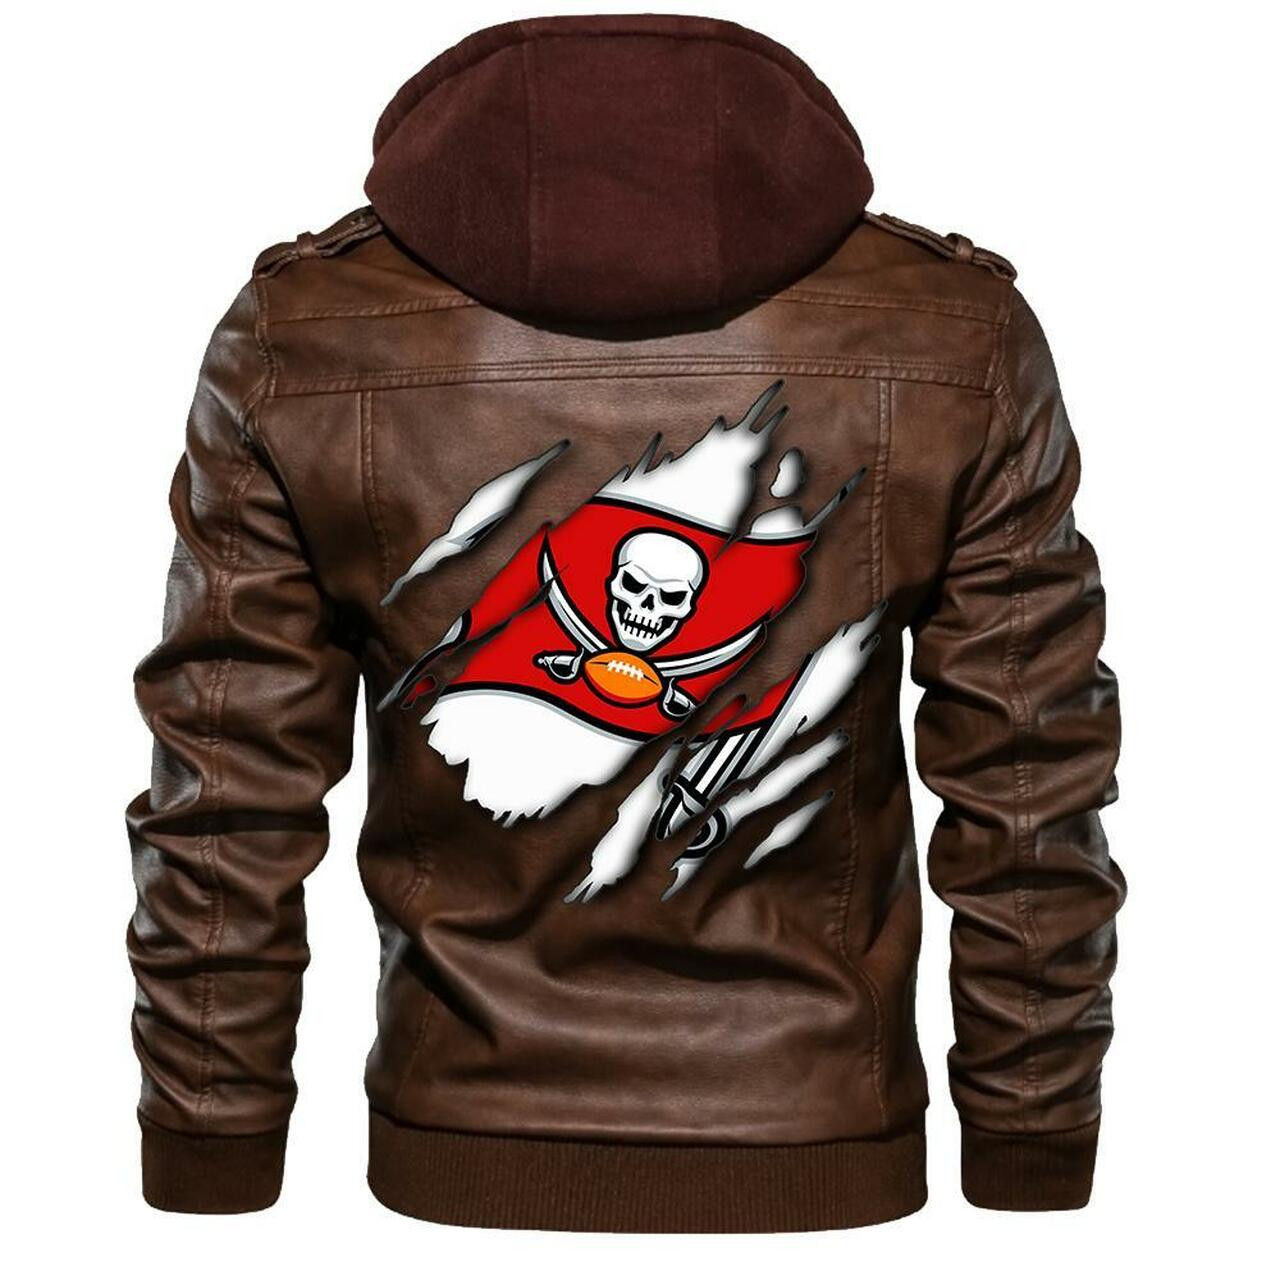 You'll get the best Leather Jacket by shopping online 89